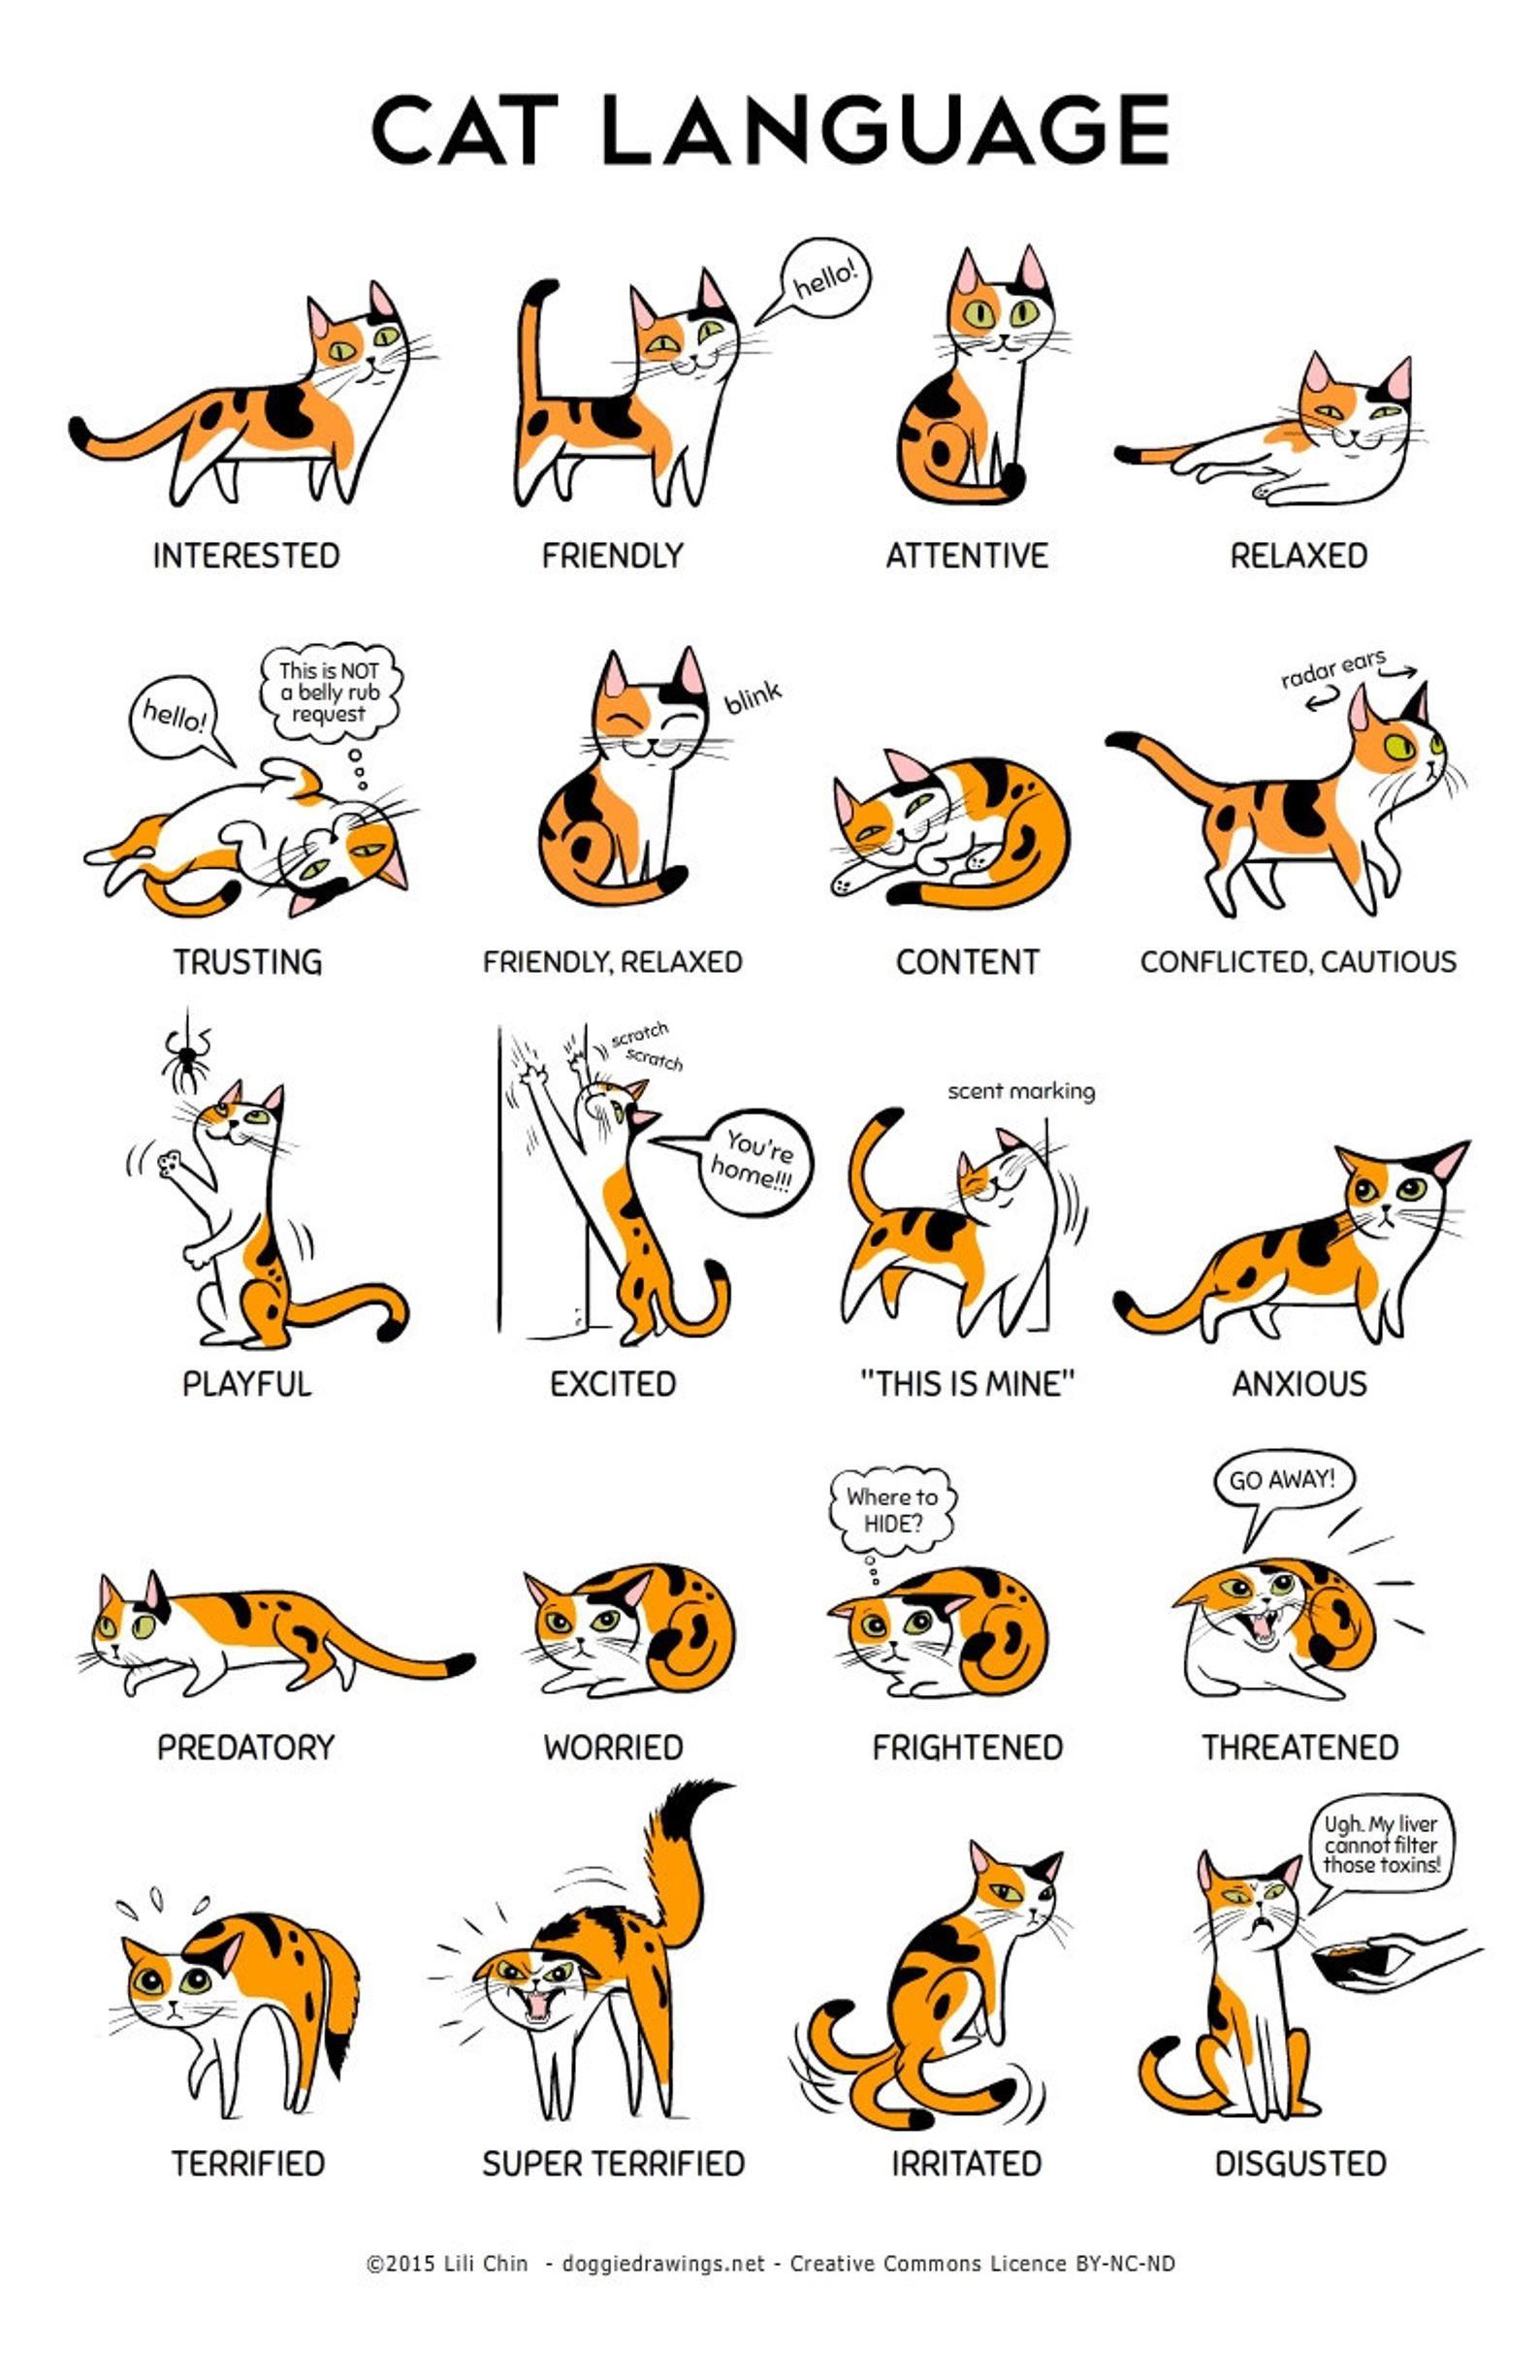 Language to cat owners!